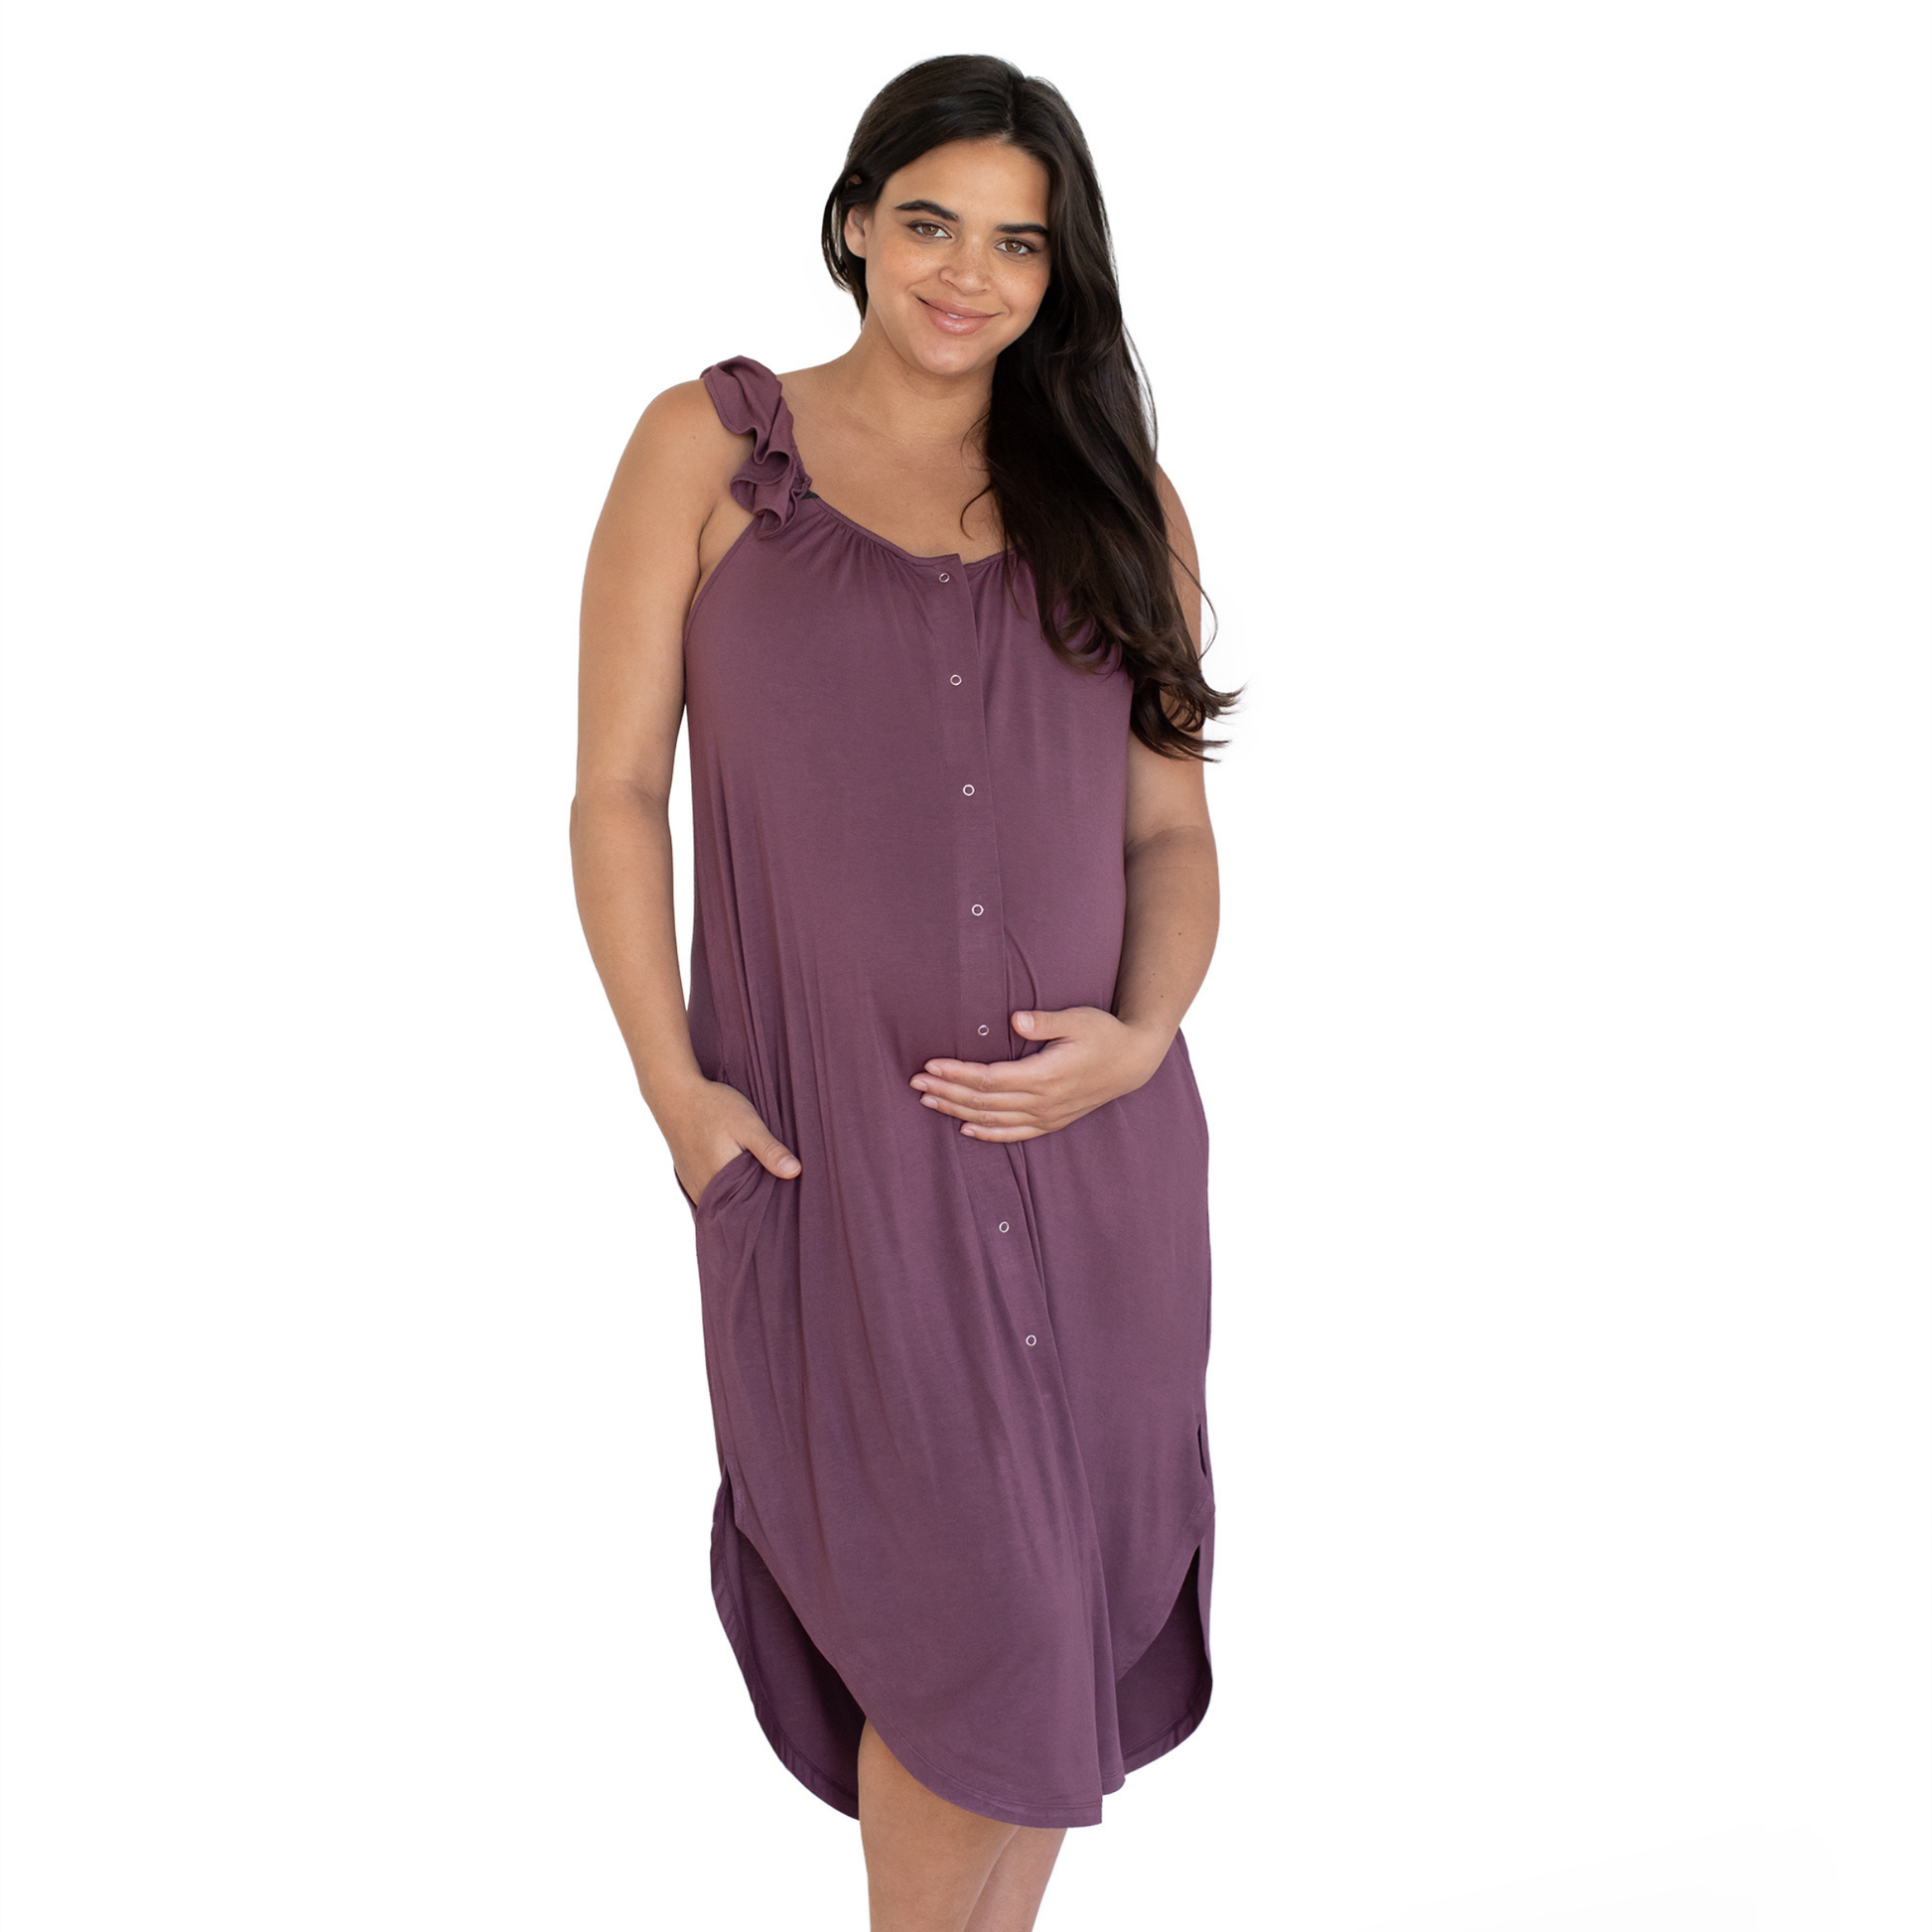 Kindred Bravely - Ruffle Strap Labor & Delivery Gown – Millie Bo Peep